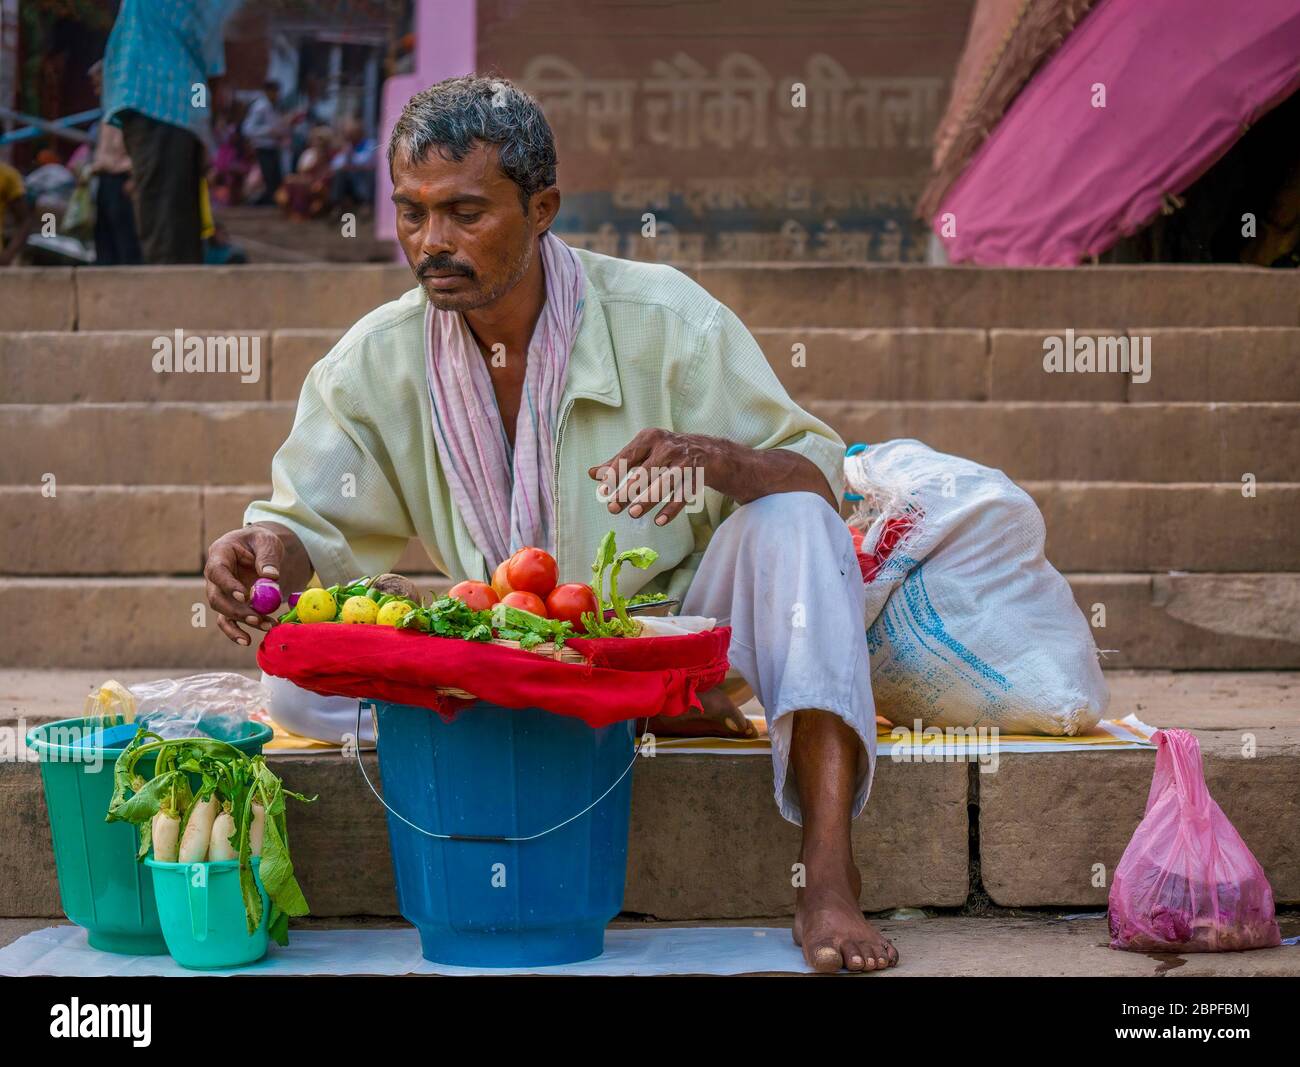 Varanasi, India - November 11, 2015. An Indian man prepares to sell fresh vegetables to pilgrims and tourists while sitting on the ghat steps. Stock Photo